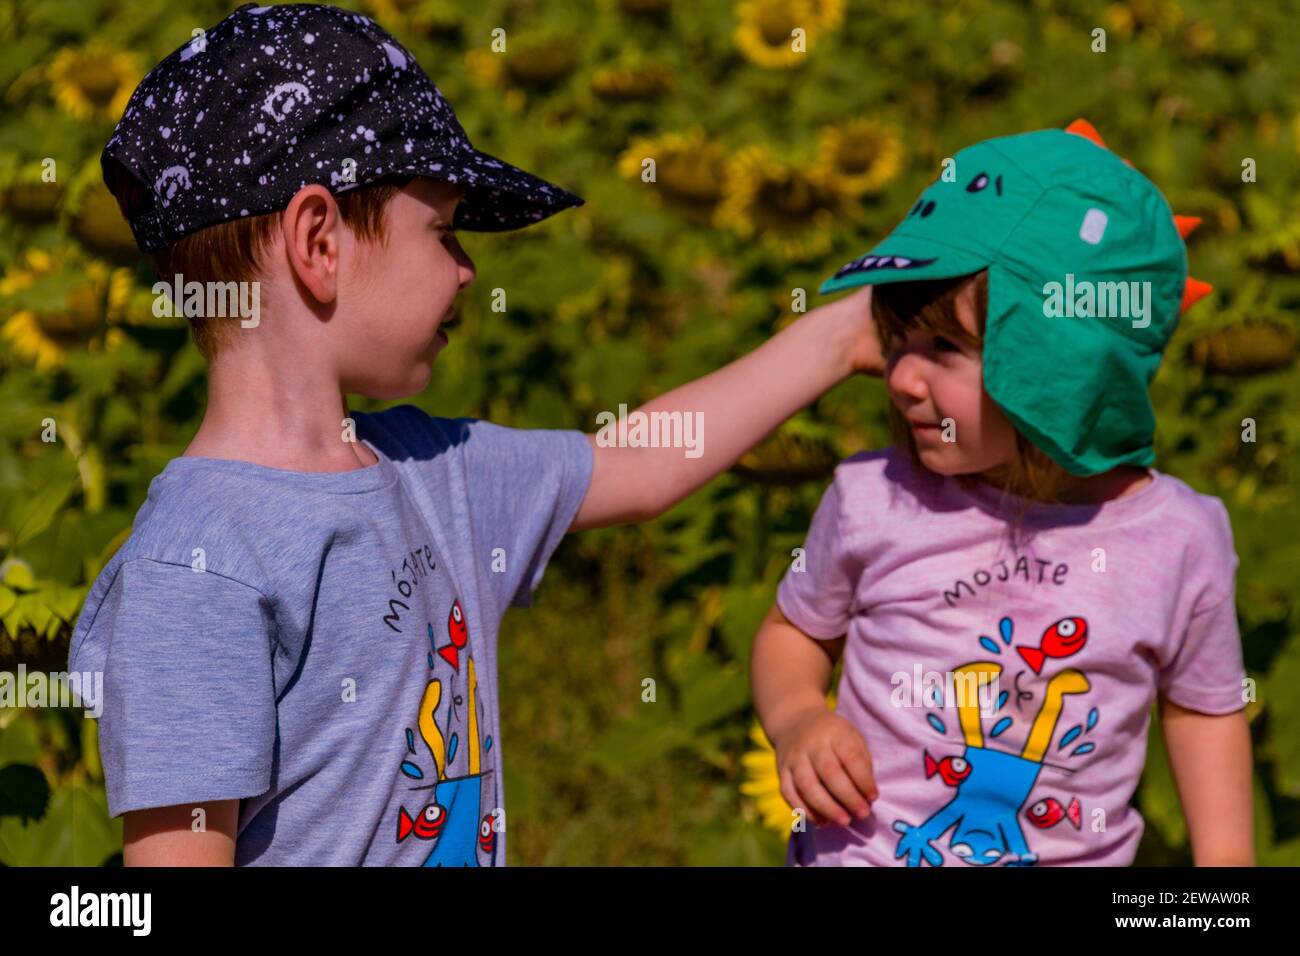 A cute redhead boy with a cap and a baby girl looking at each other in a sunflower field on a sunny summer day Stock Photo